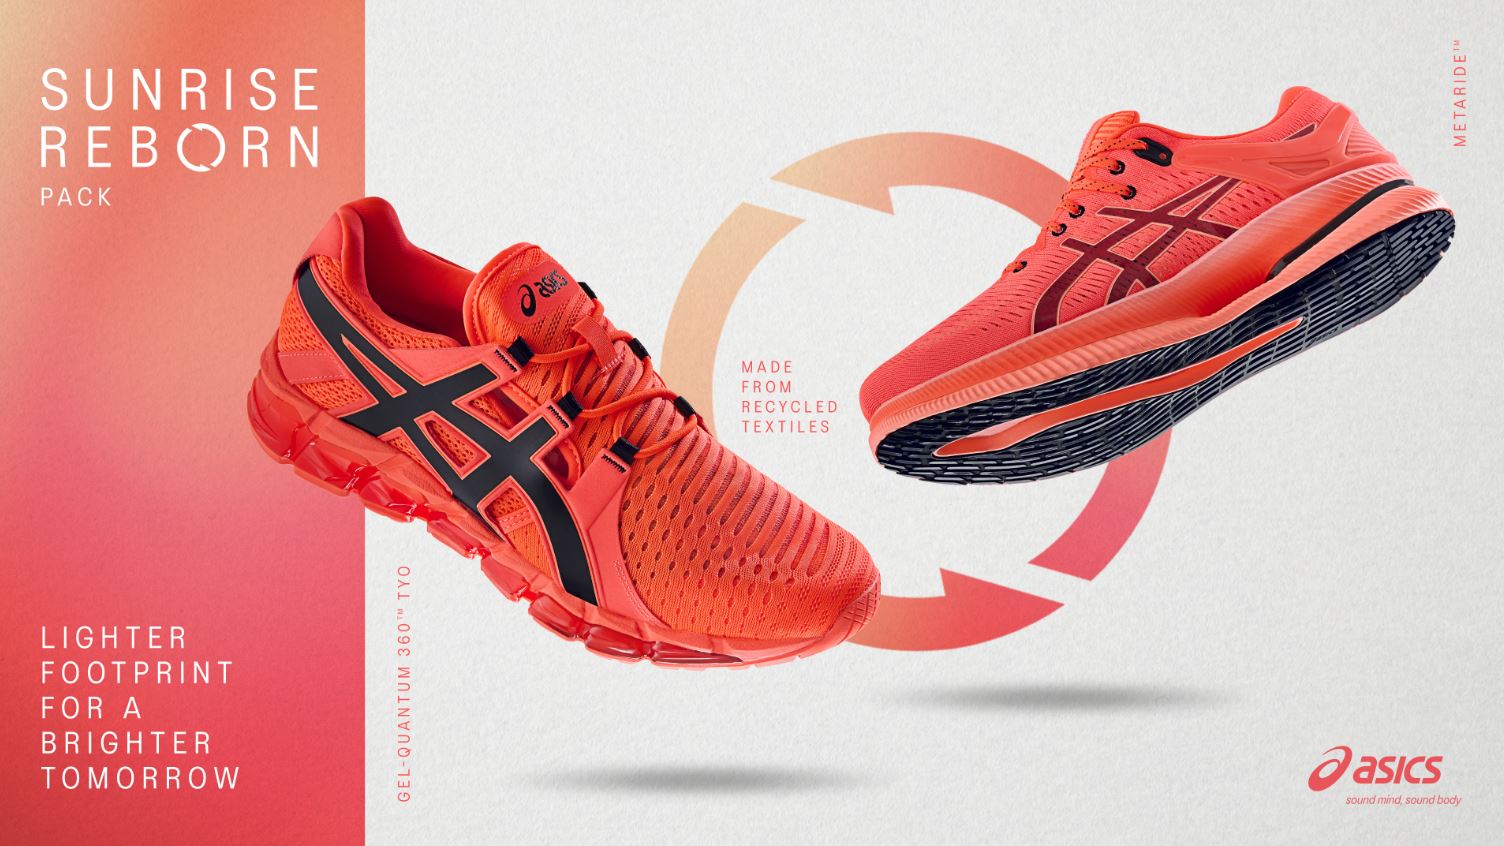 Lighter footprint, brighter tomorrow: ASICS upcycles second-hand clothes to create new running shoes